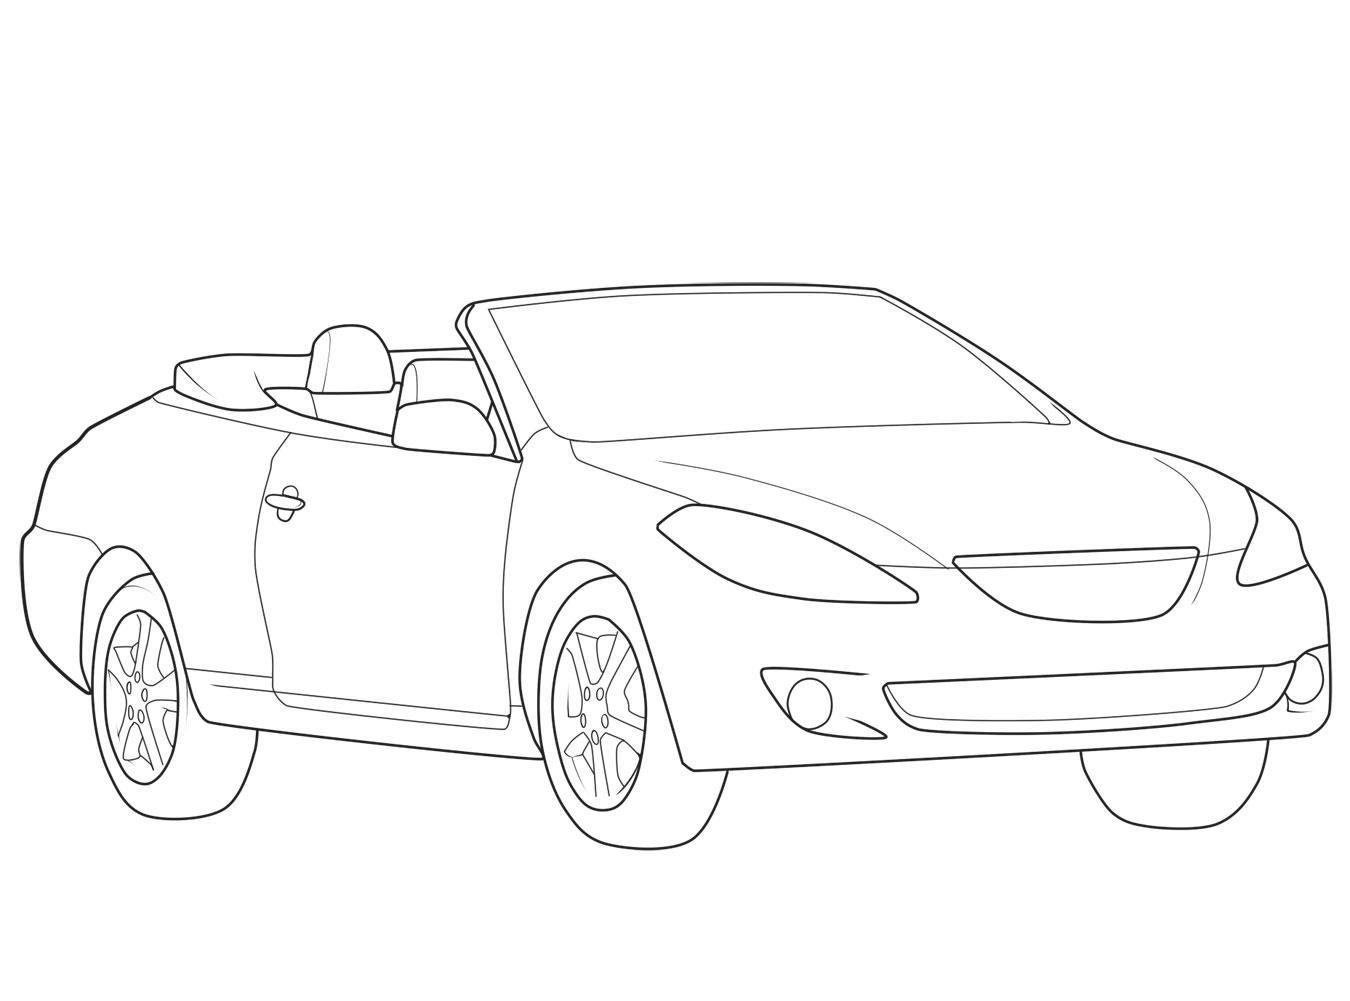 how-to-draw-a-convertible-step-9_1_000000046431_5